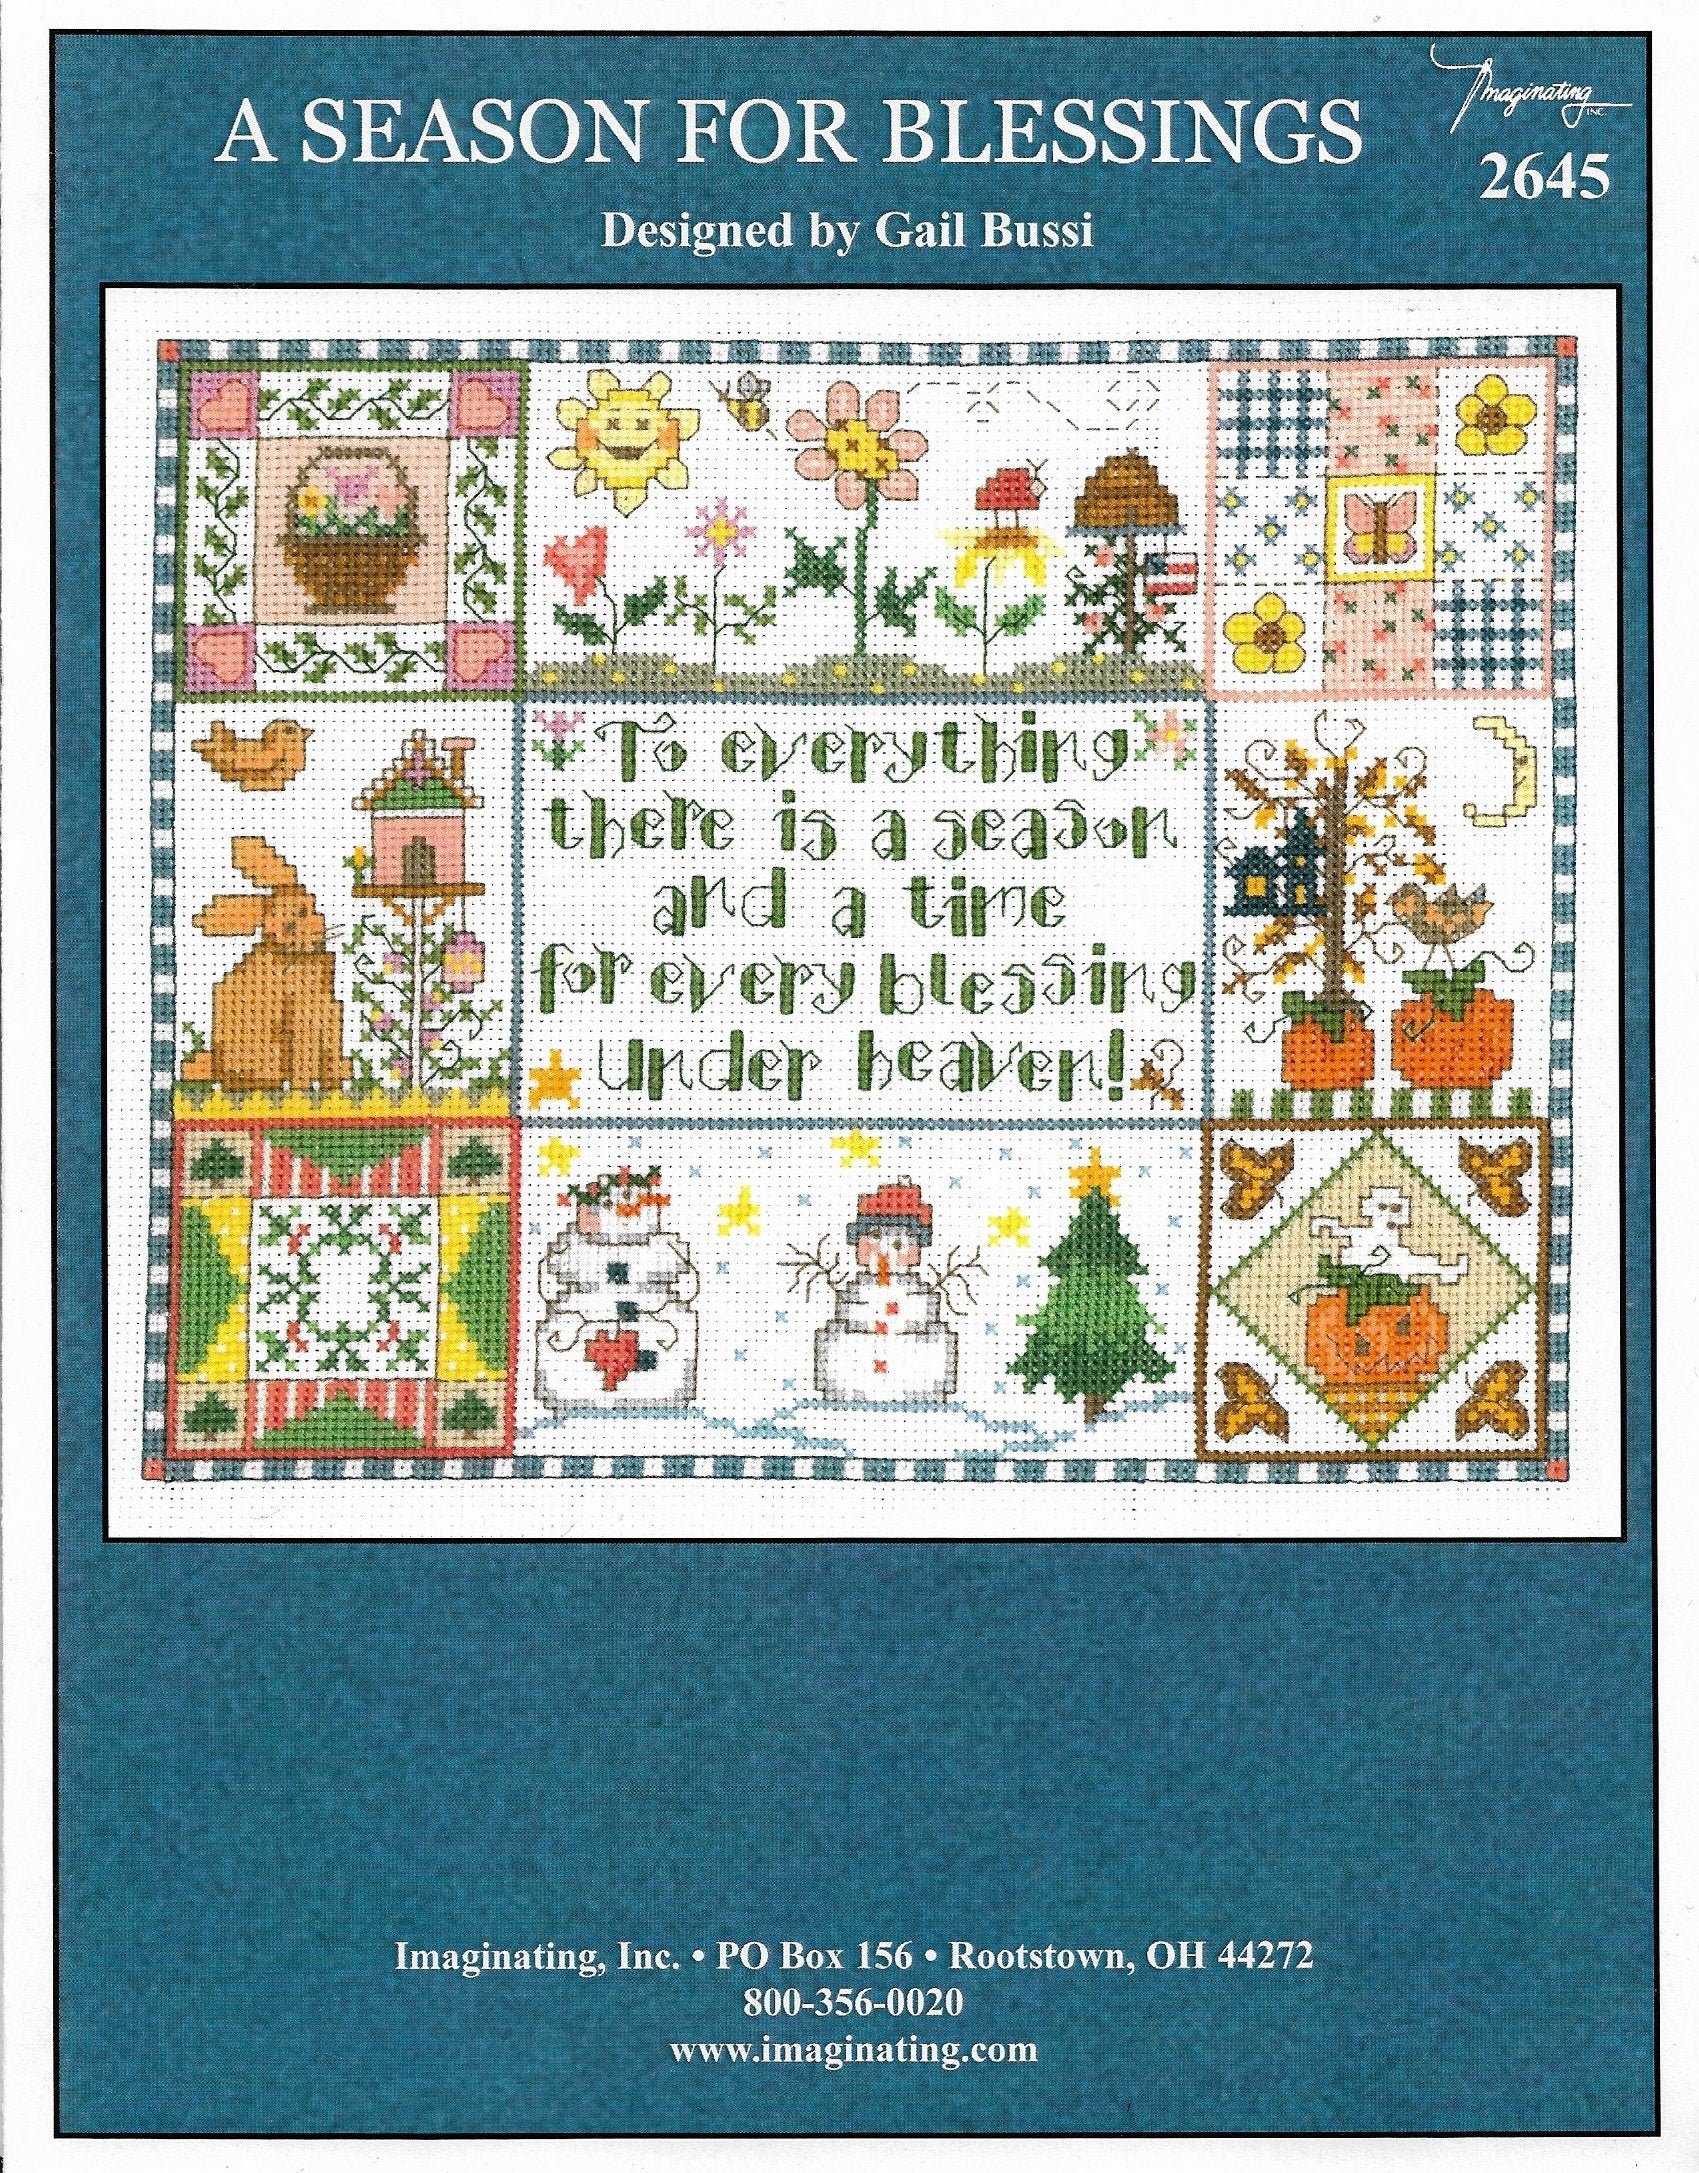 Imaginating A Season for blessings 2645 cross stitch pattern